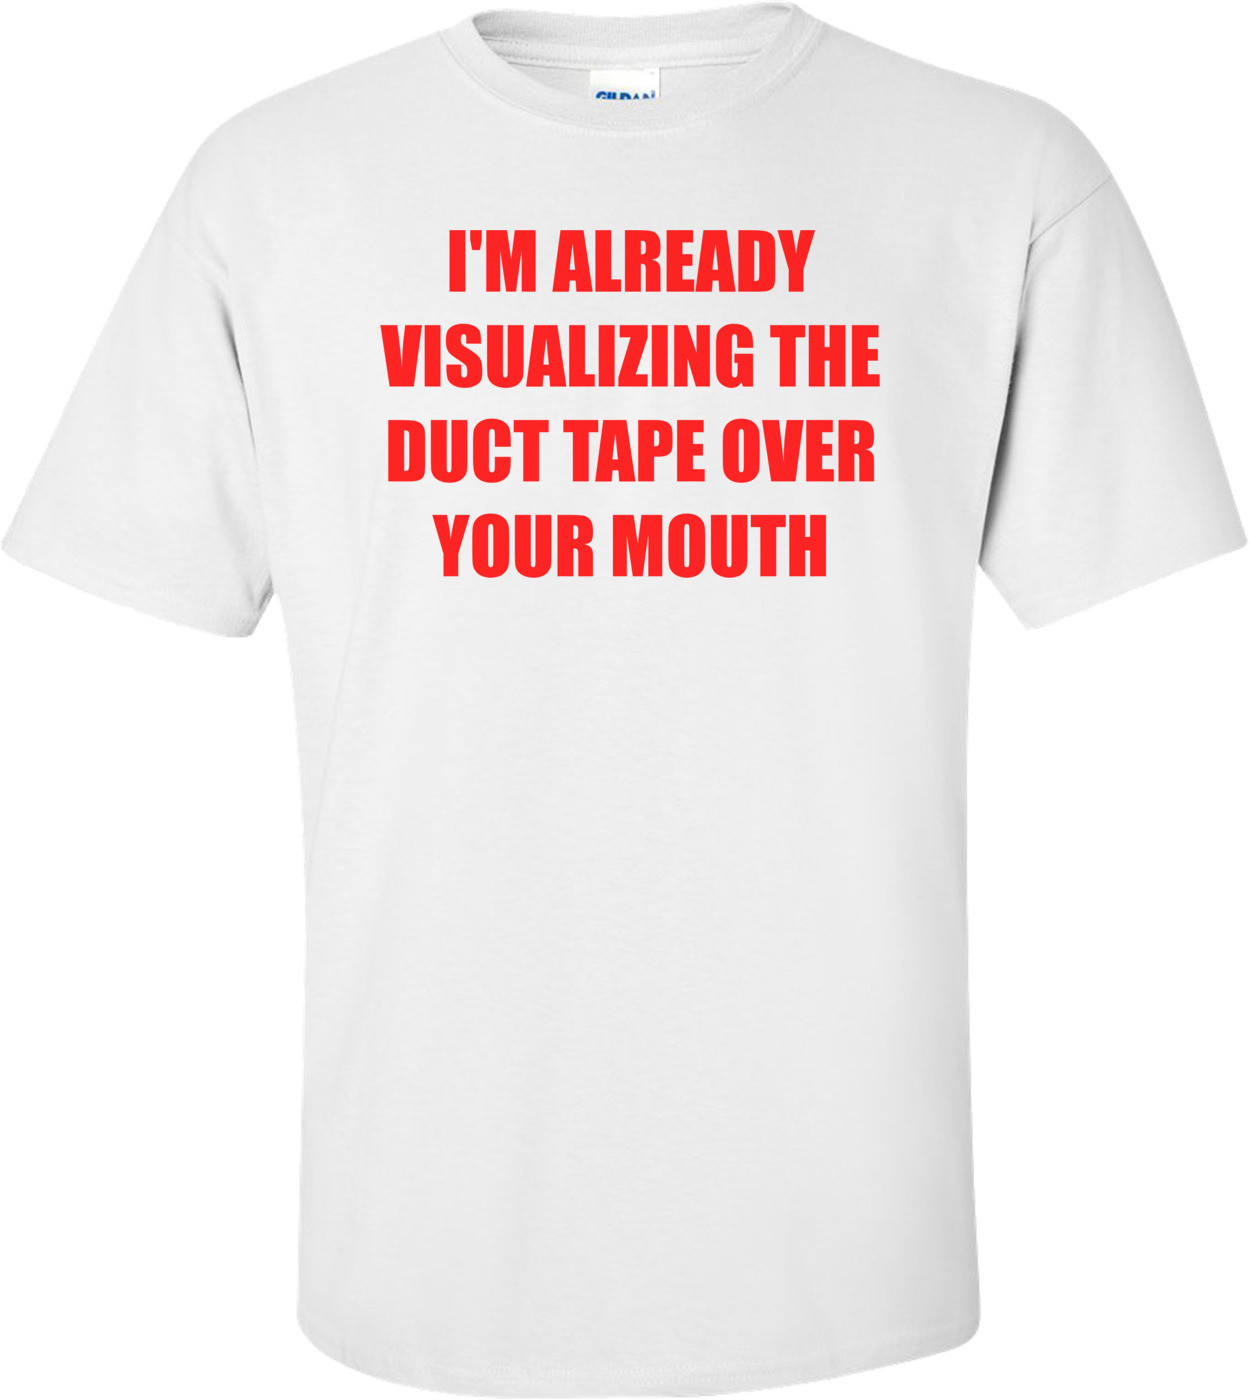 I'M ALREADY VISUALIZING THE DUCT TAPE OVER YOUR MOUTH Shirt